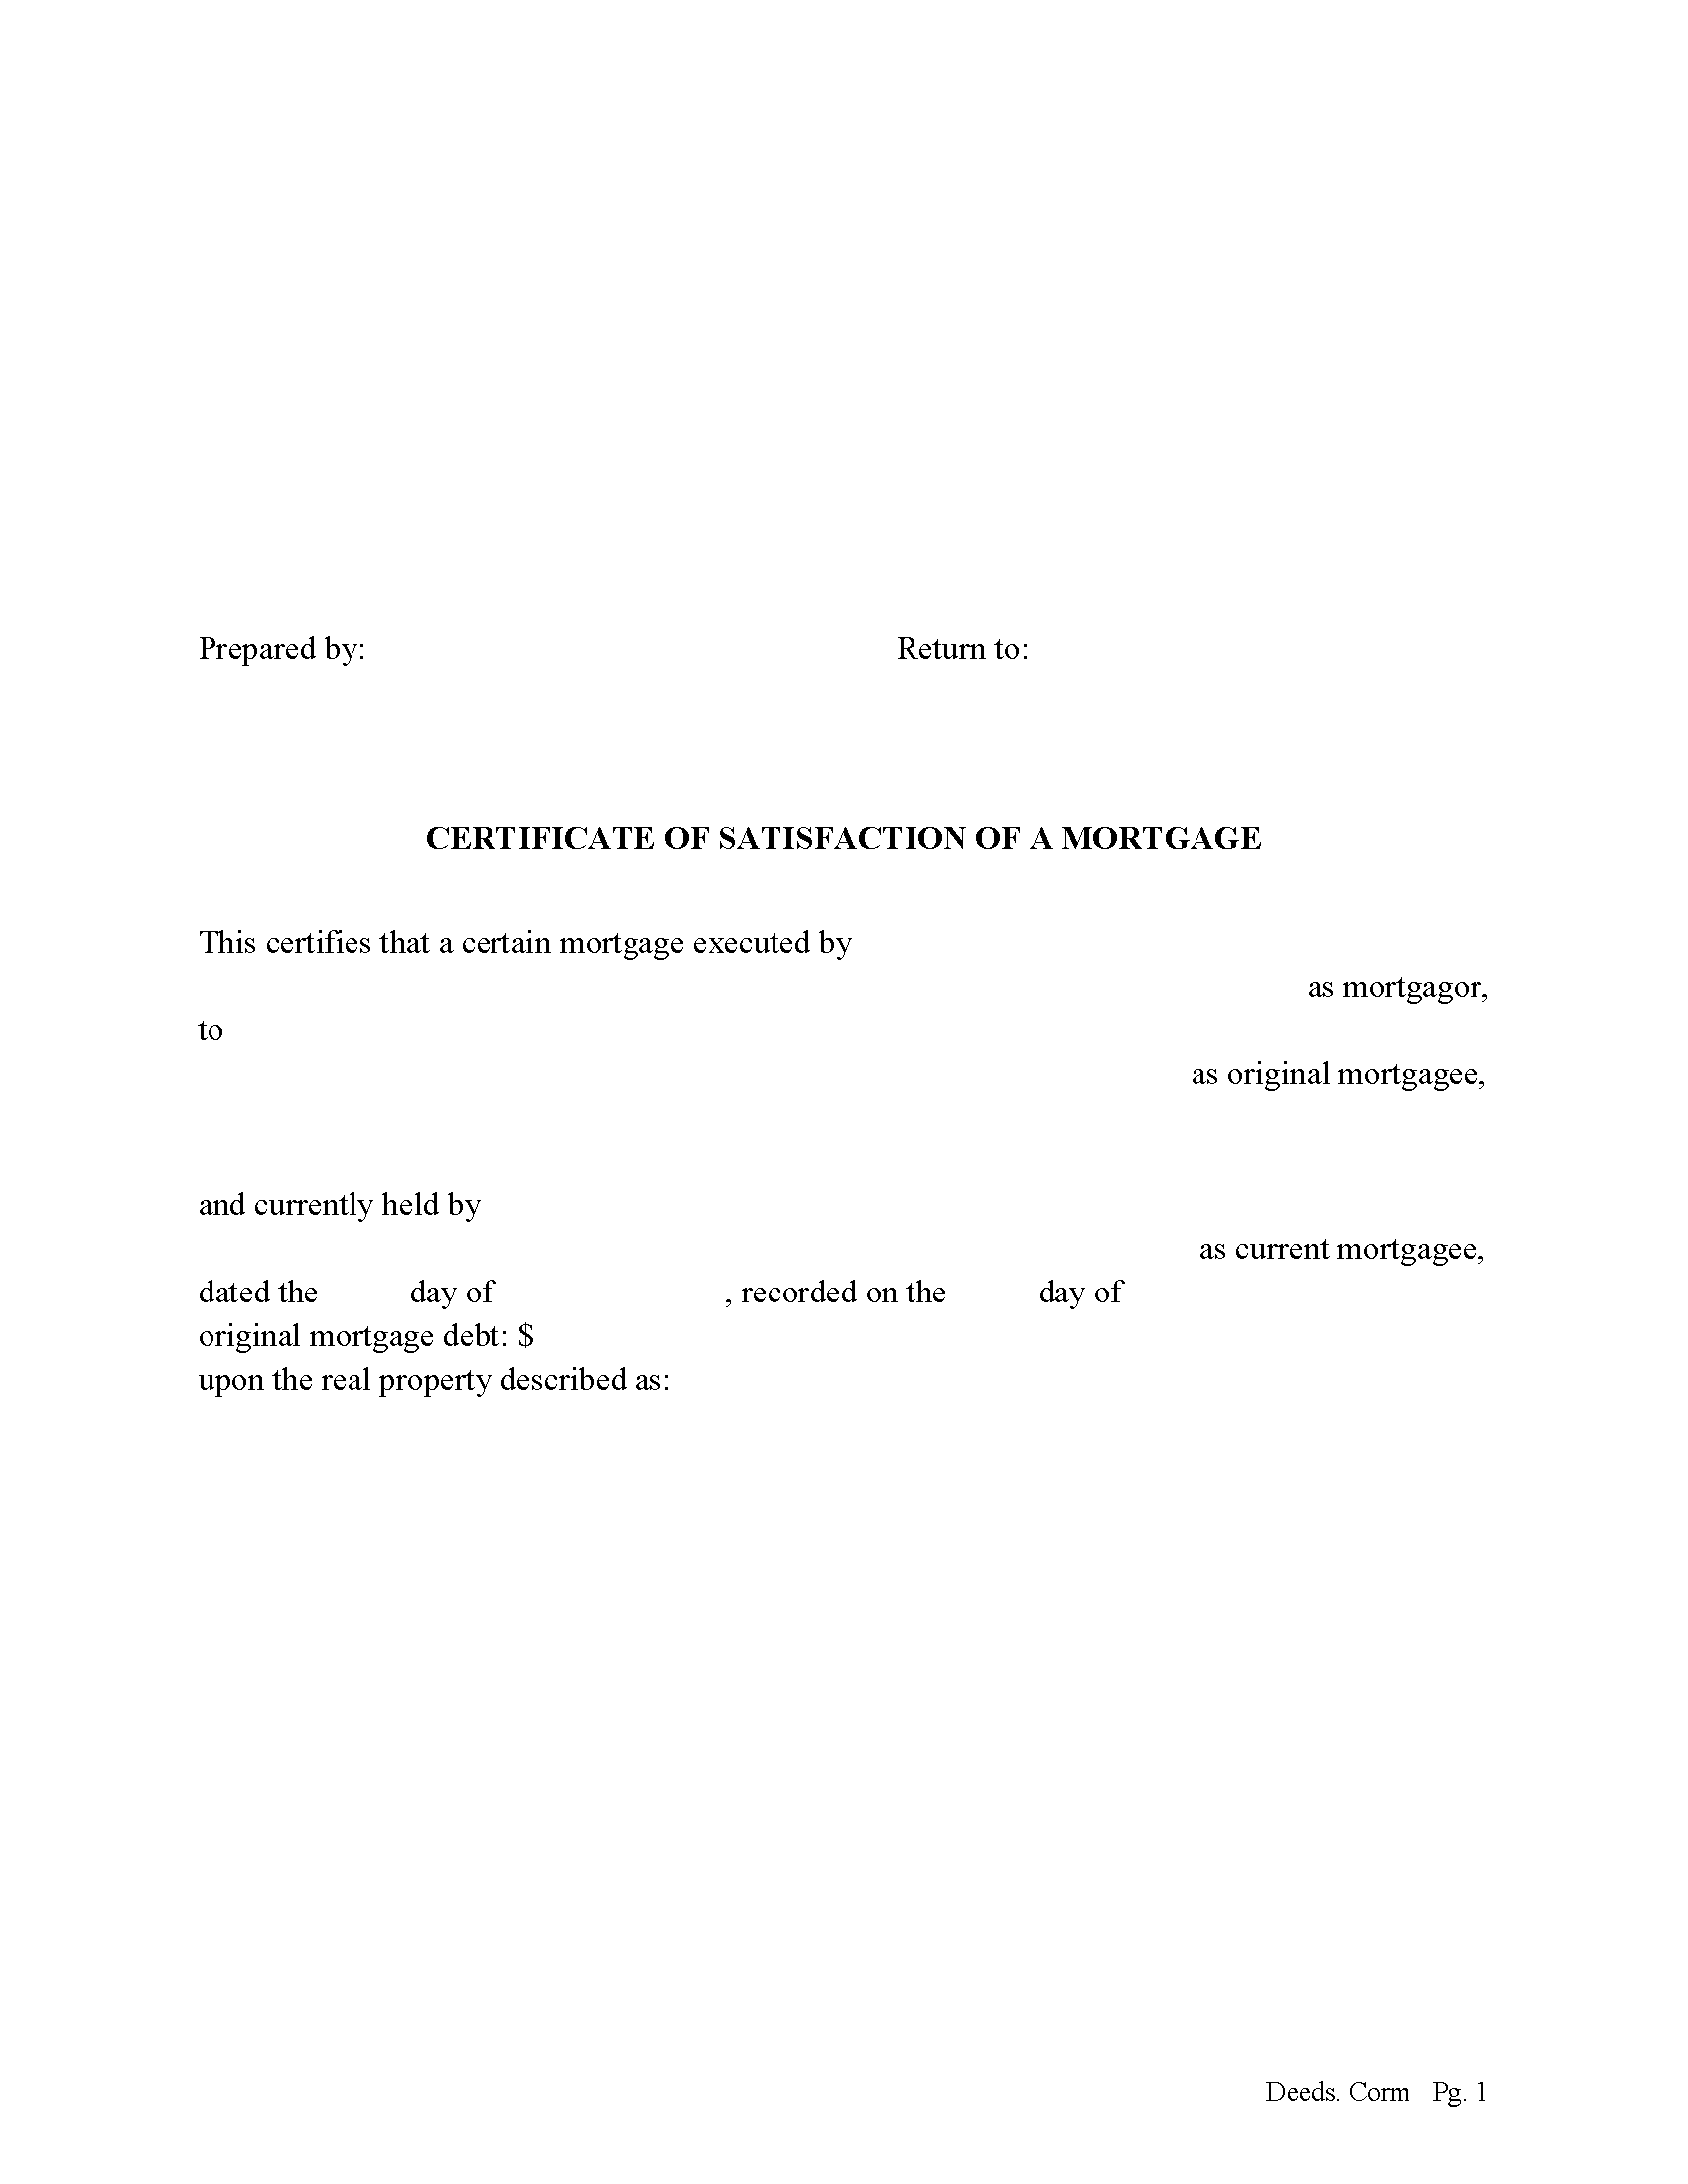 Certificate of Discharge of a Mortgage Form